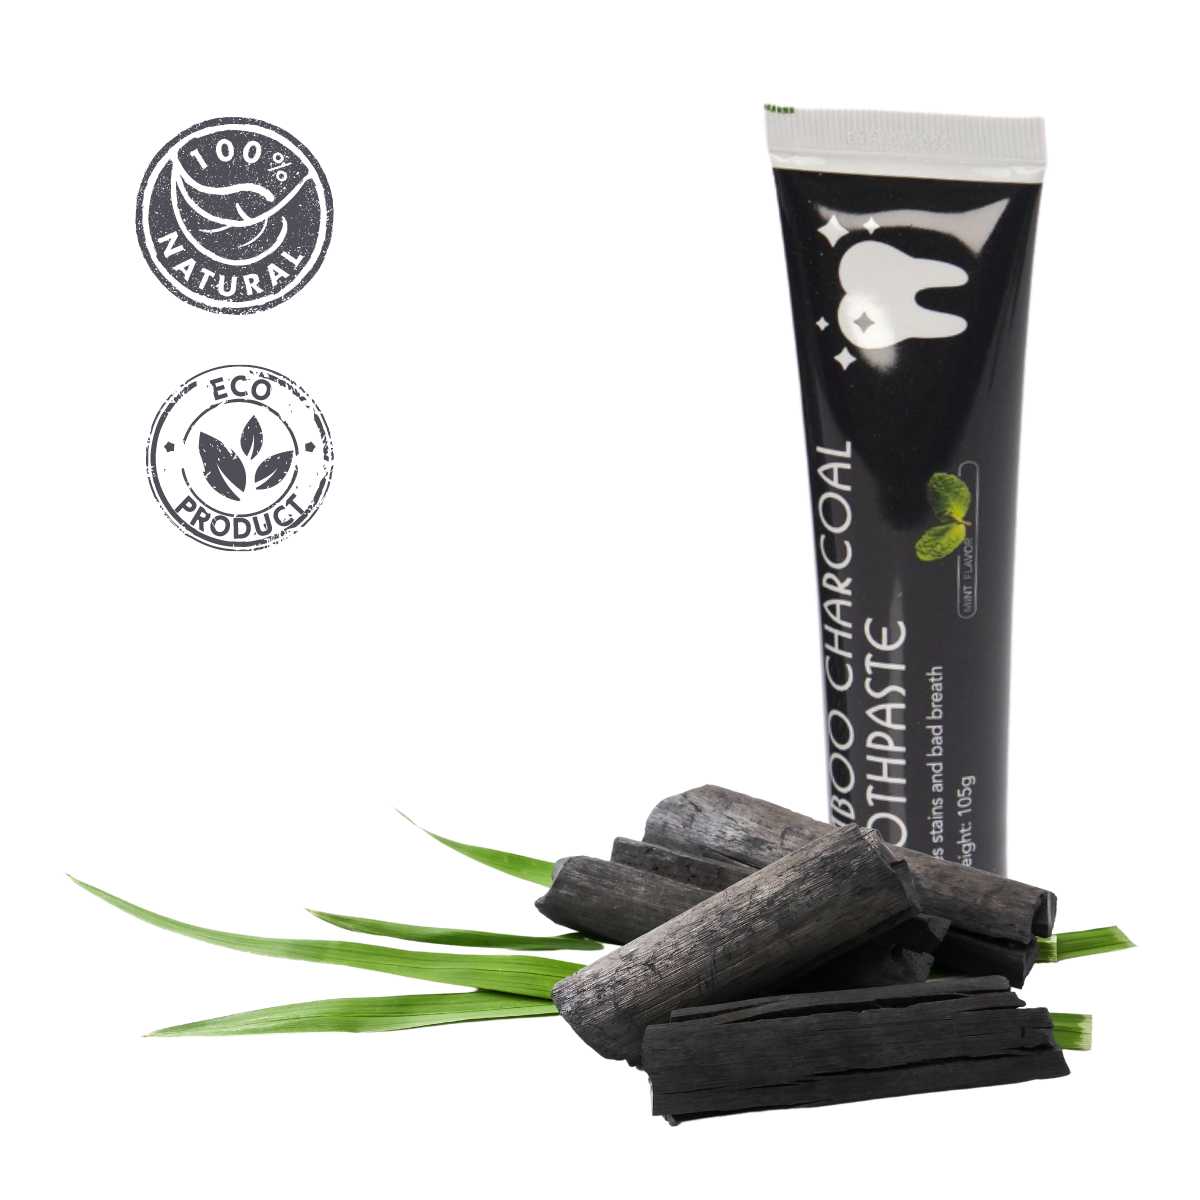 green-goose Bamboo Charcoal Toothpaste with 4 Bamboo Toothbrushes green-goose